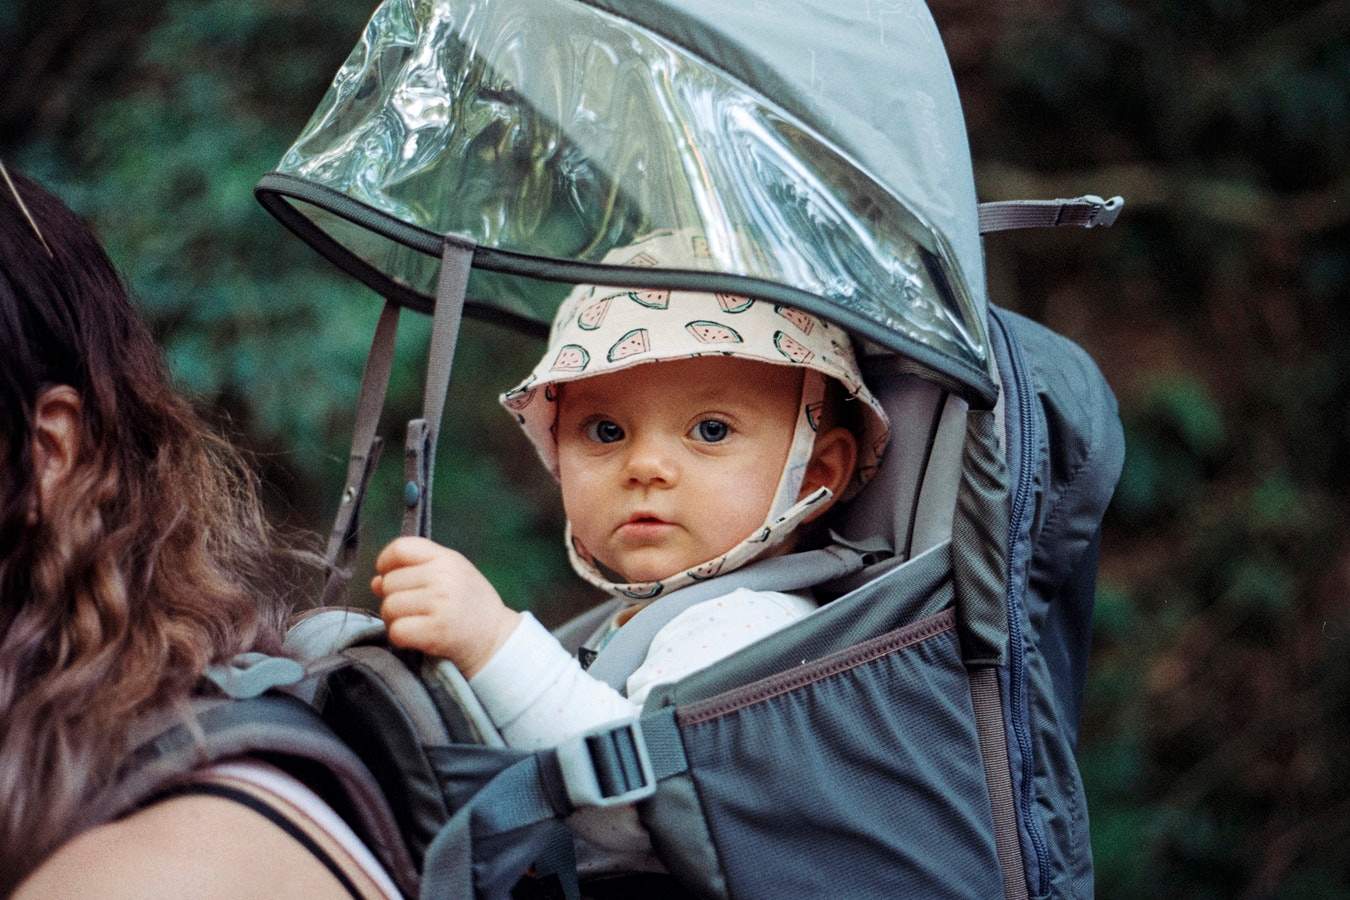 What to Expect When RVing with a Baby